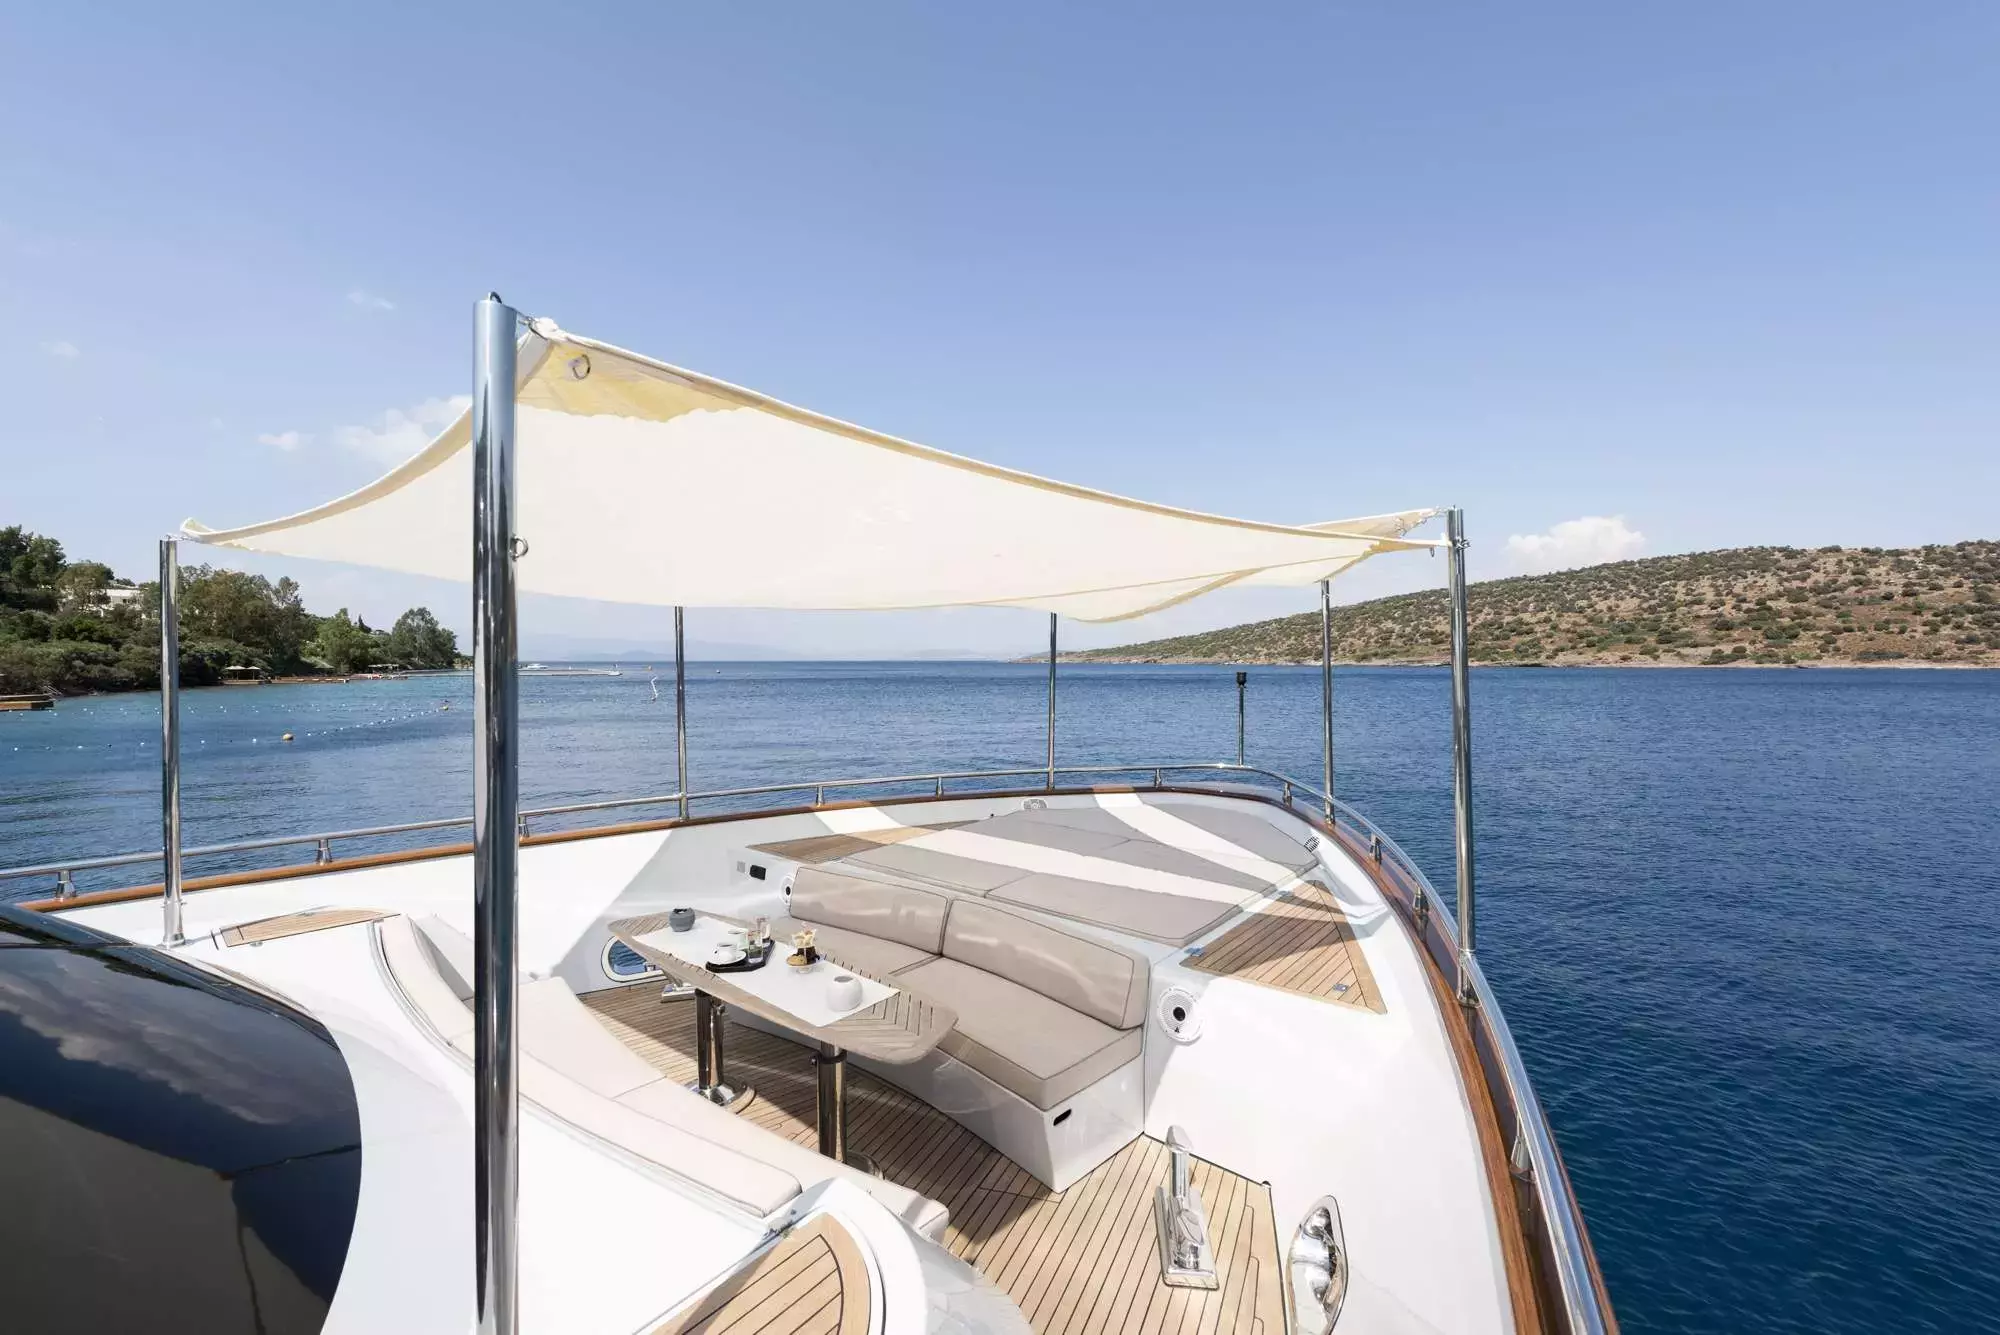 Go by Custom Made - Special Offer for a private Motor Yacht Charter in Mykonos with a crew